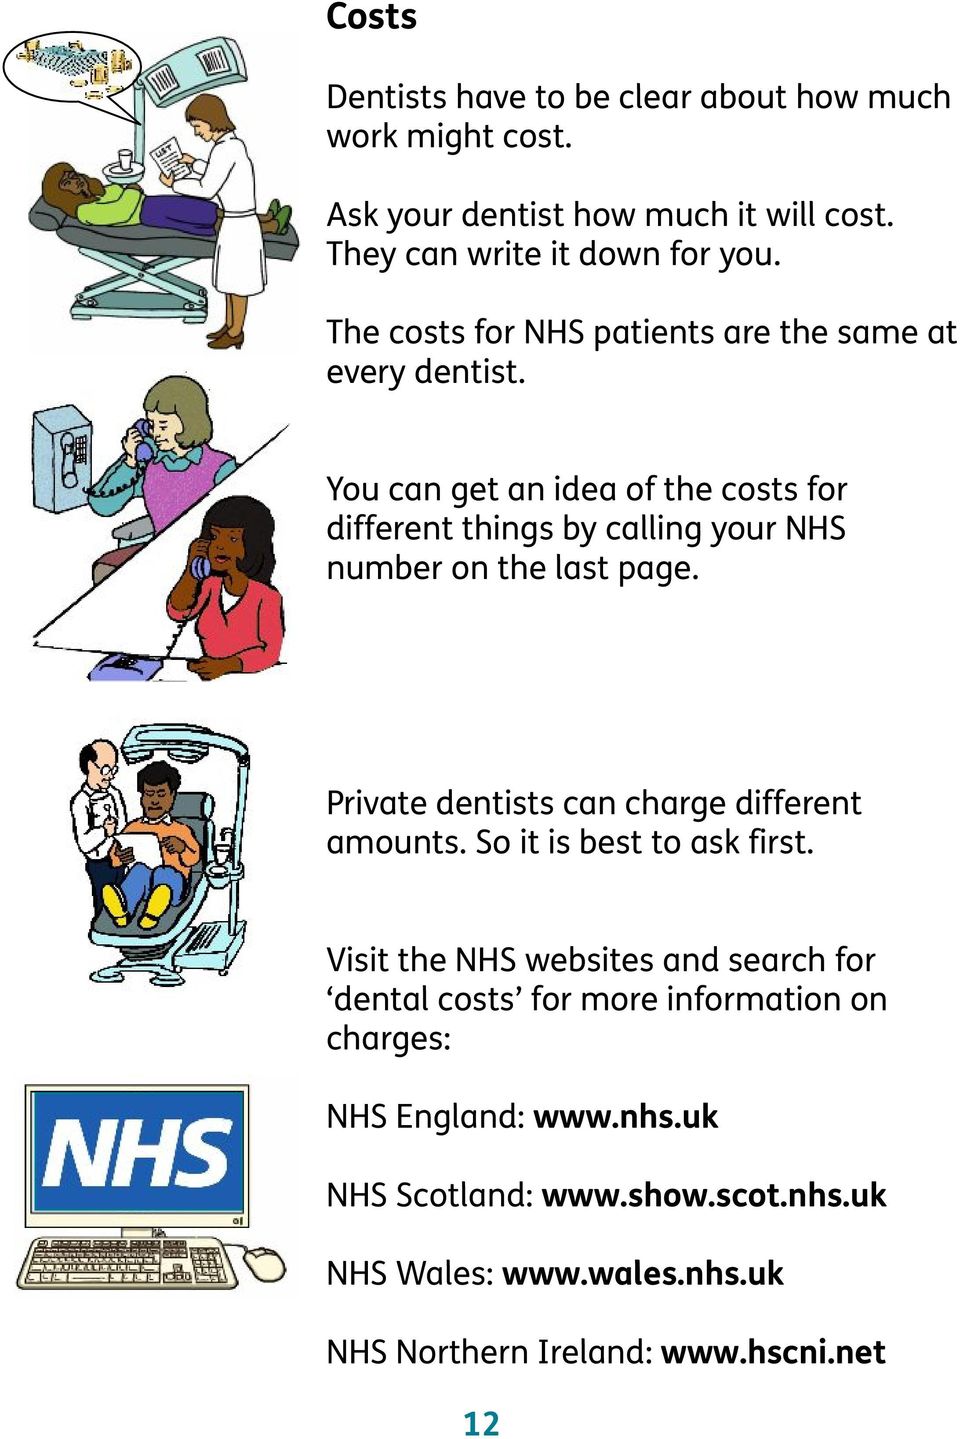 You can get an idea of the costs for different things by calling your NHS number on the last page. Private dentists can charge different amounts.